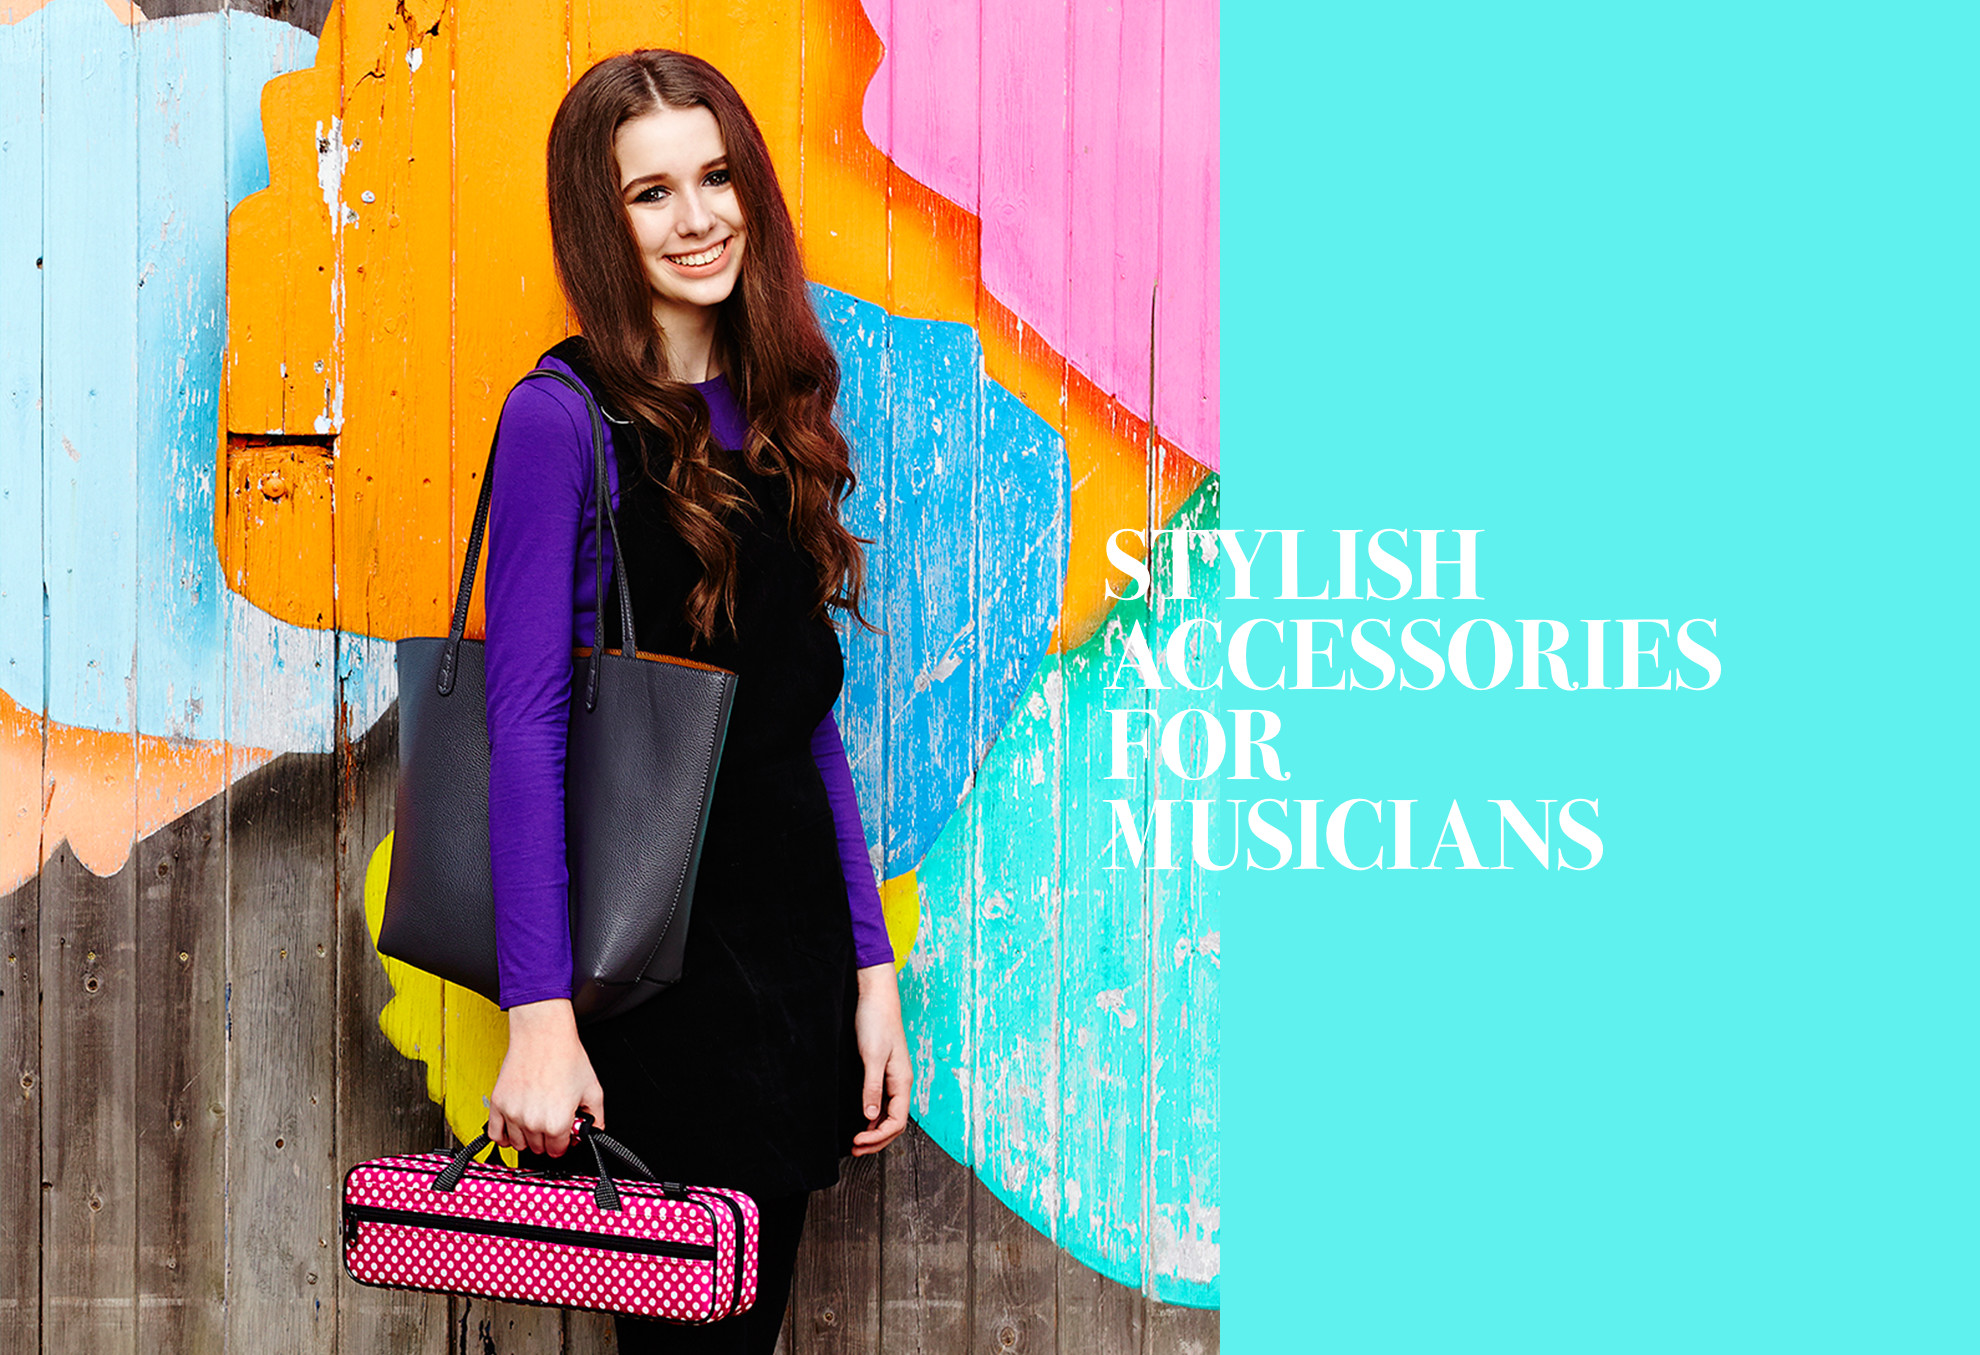 STYLISH ACCESSORIES FOR MUSICIANS